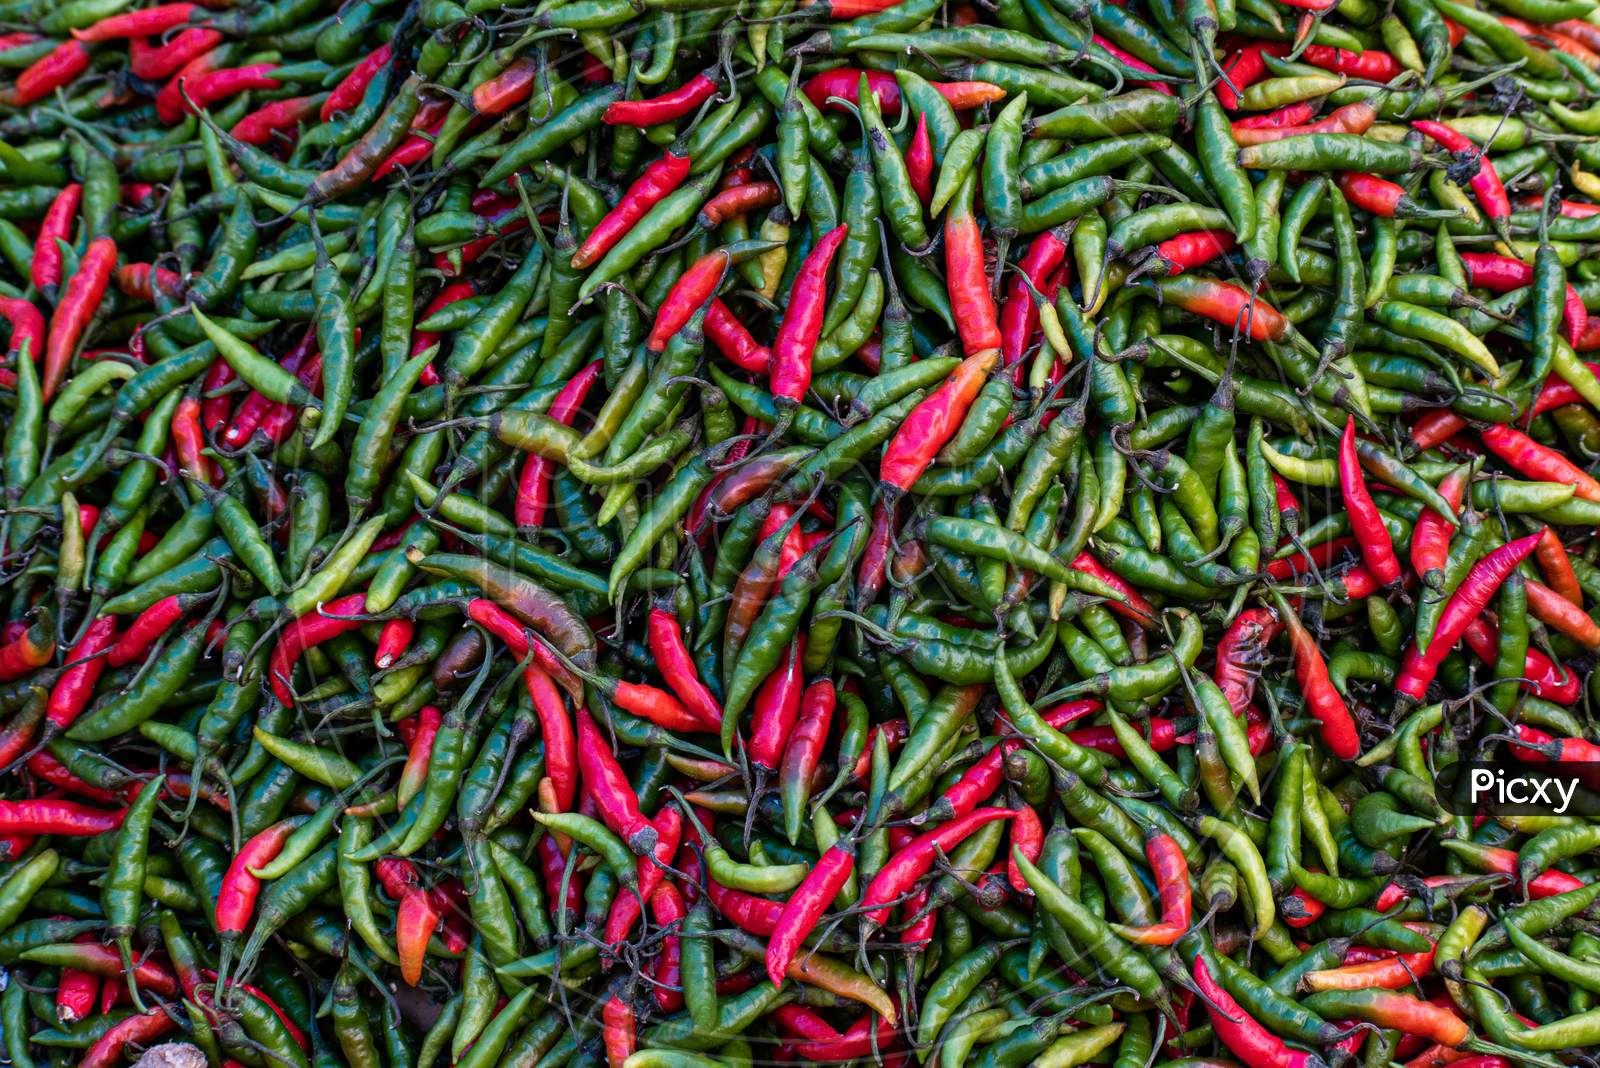 A lot of Fresh organic Green and red hot chili